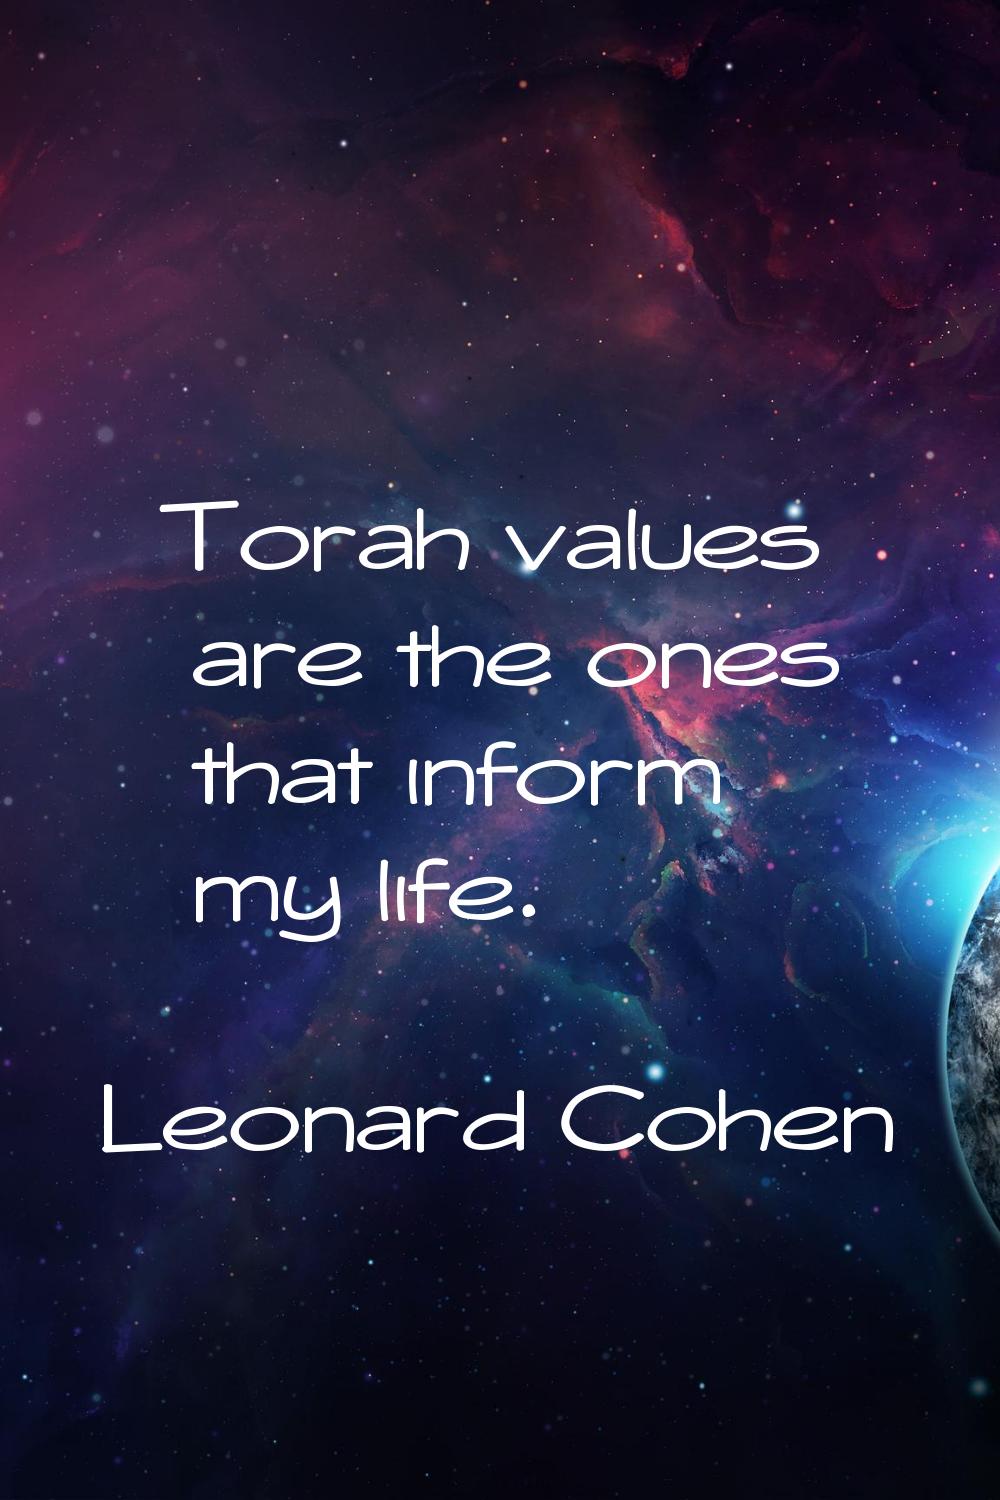 Torah values are the ones that inform my life.